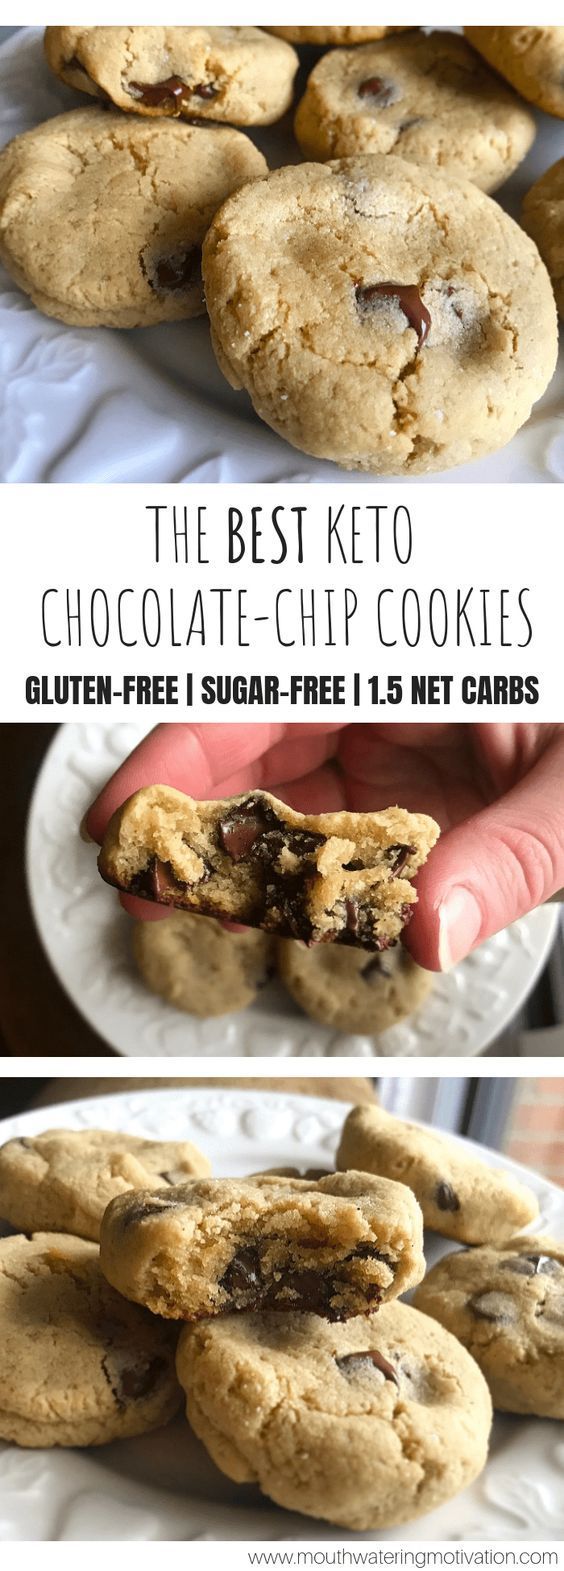 Chewy Keto Chocolate-Chip Cookies -   12 healthy recipes Yummy desserts ideas